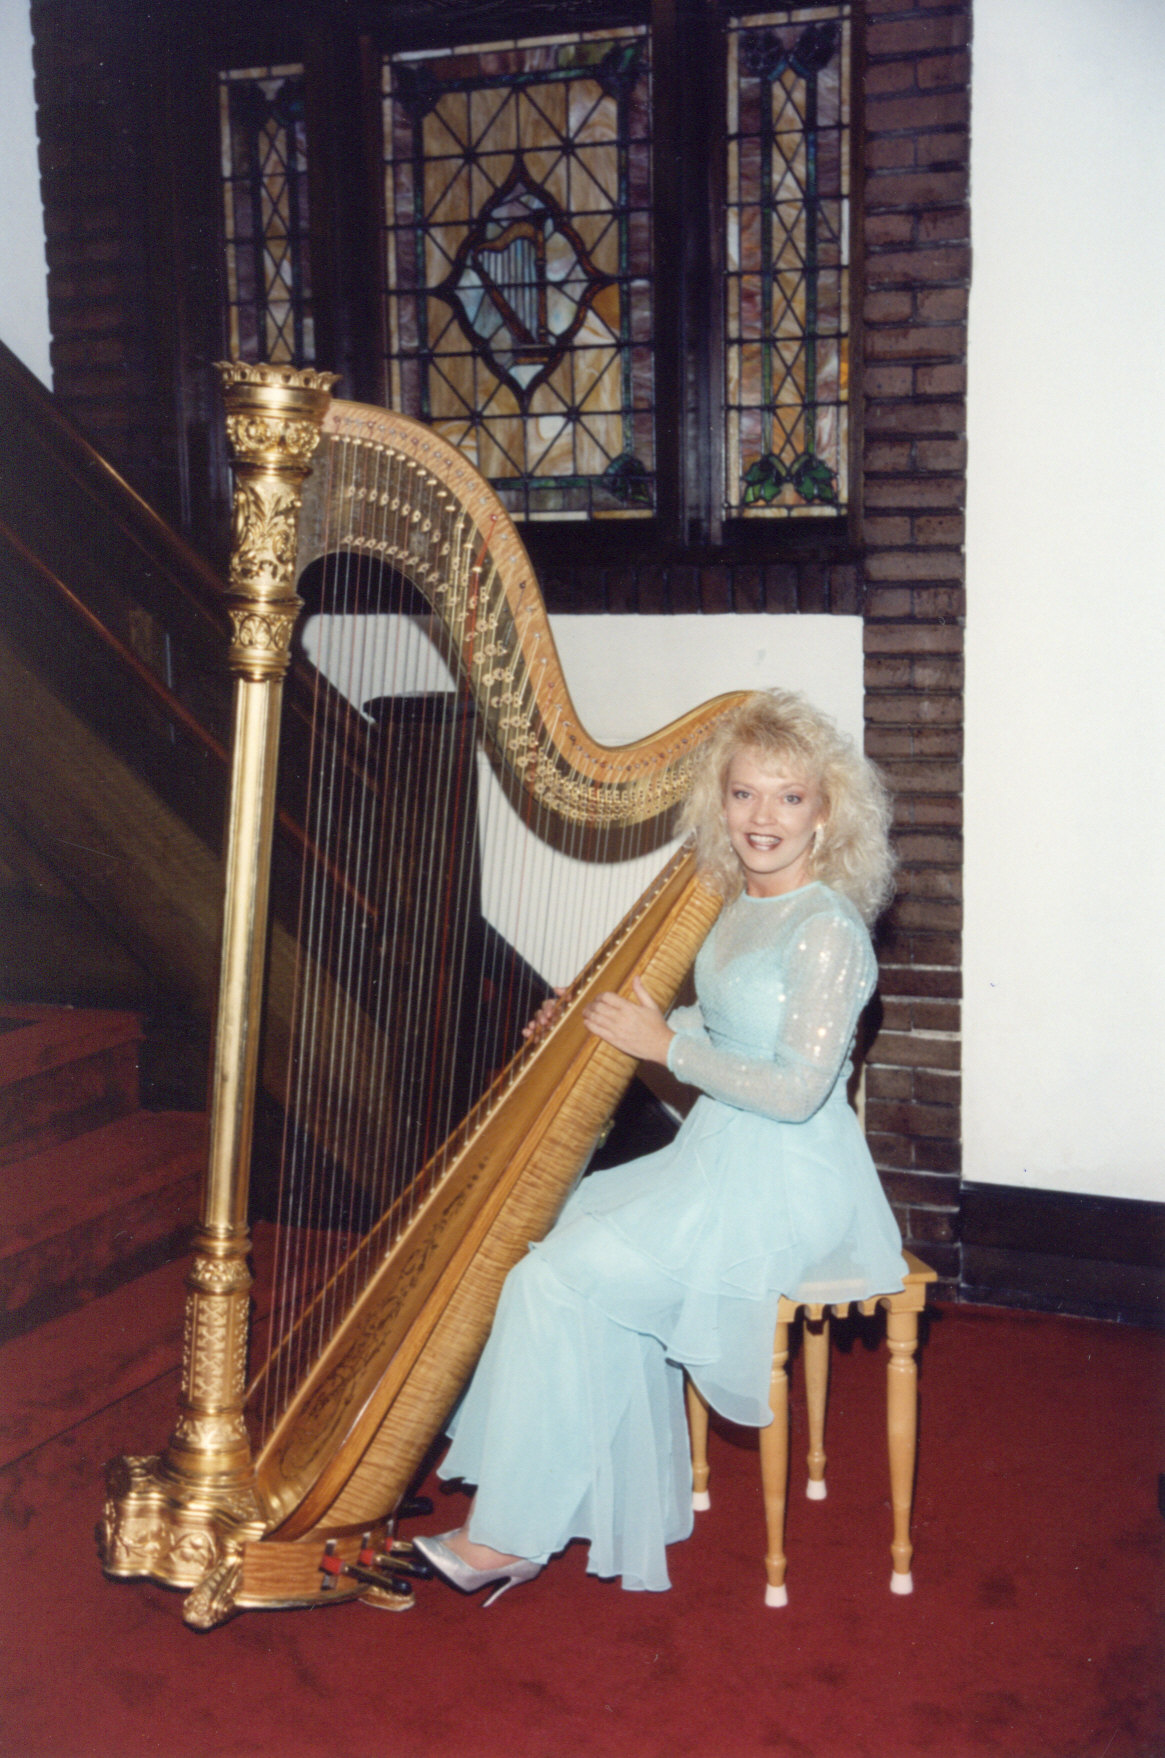 Gold 23 Lyon-Healy Harp at First Christain Church in Knoxville, TN (notice the window)